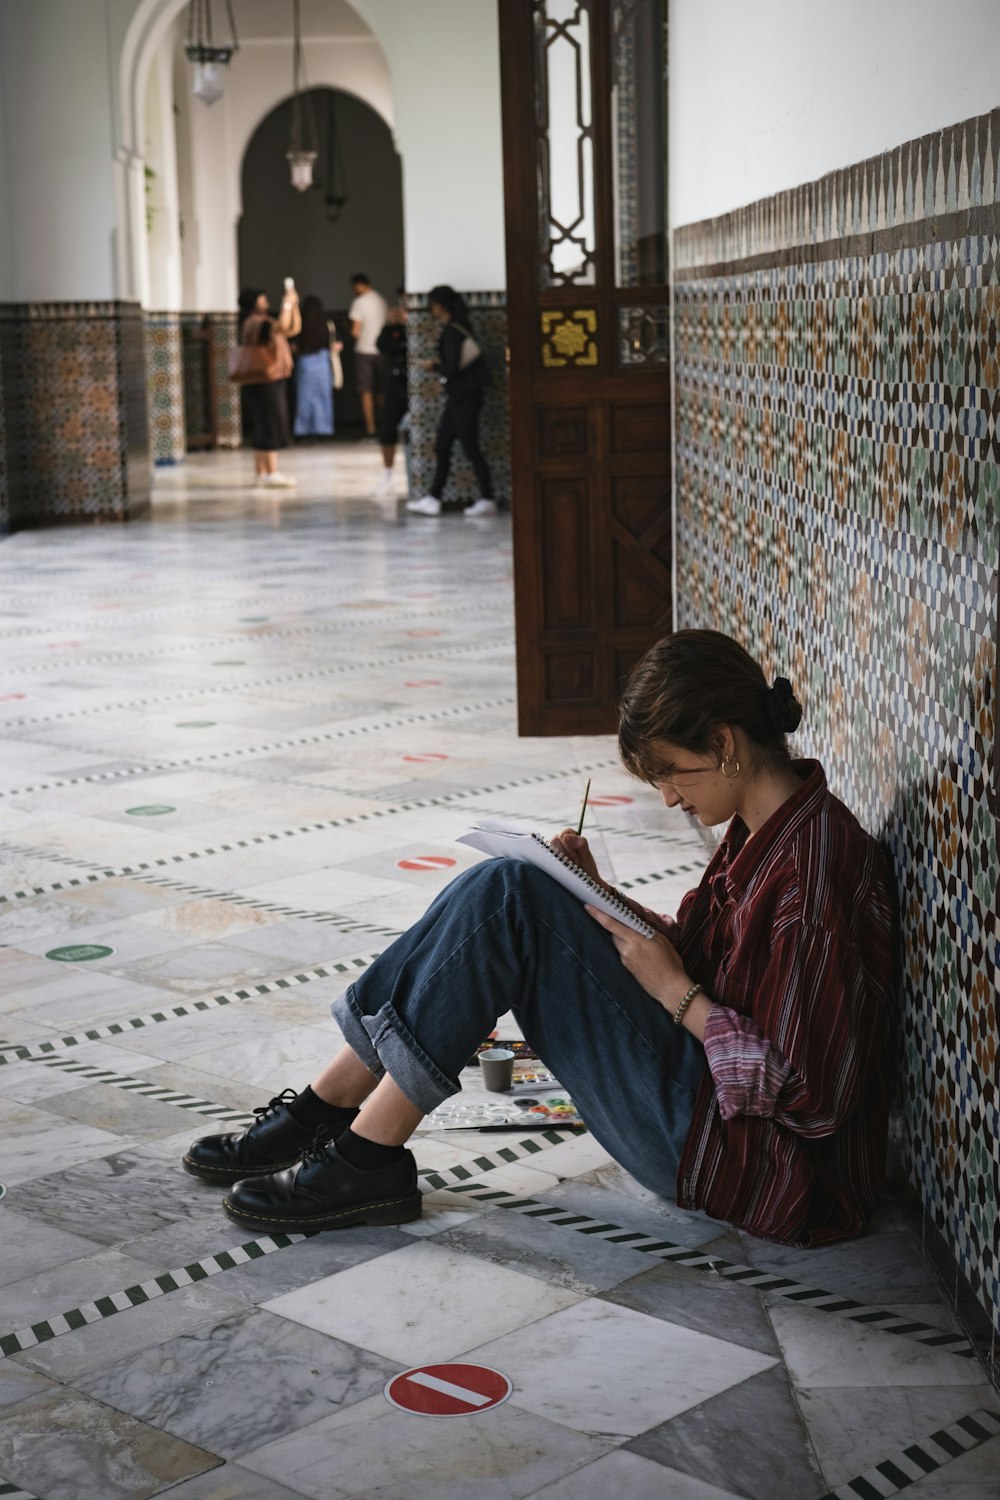 a person sitting on the ground reading a book